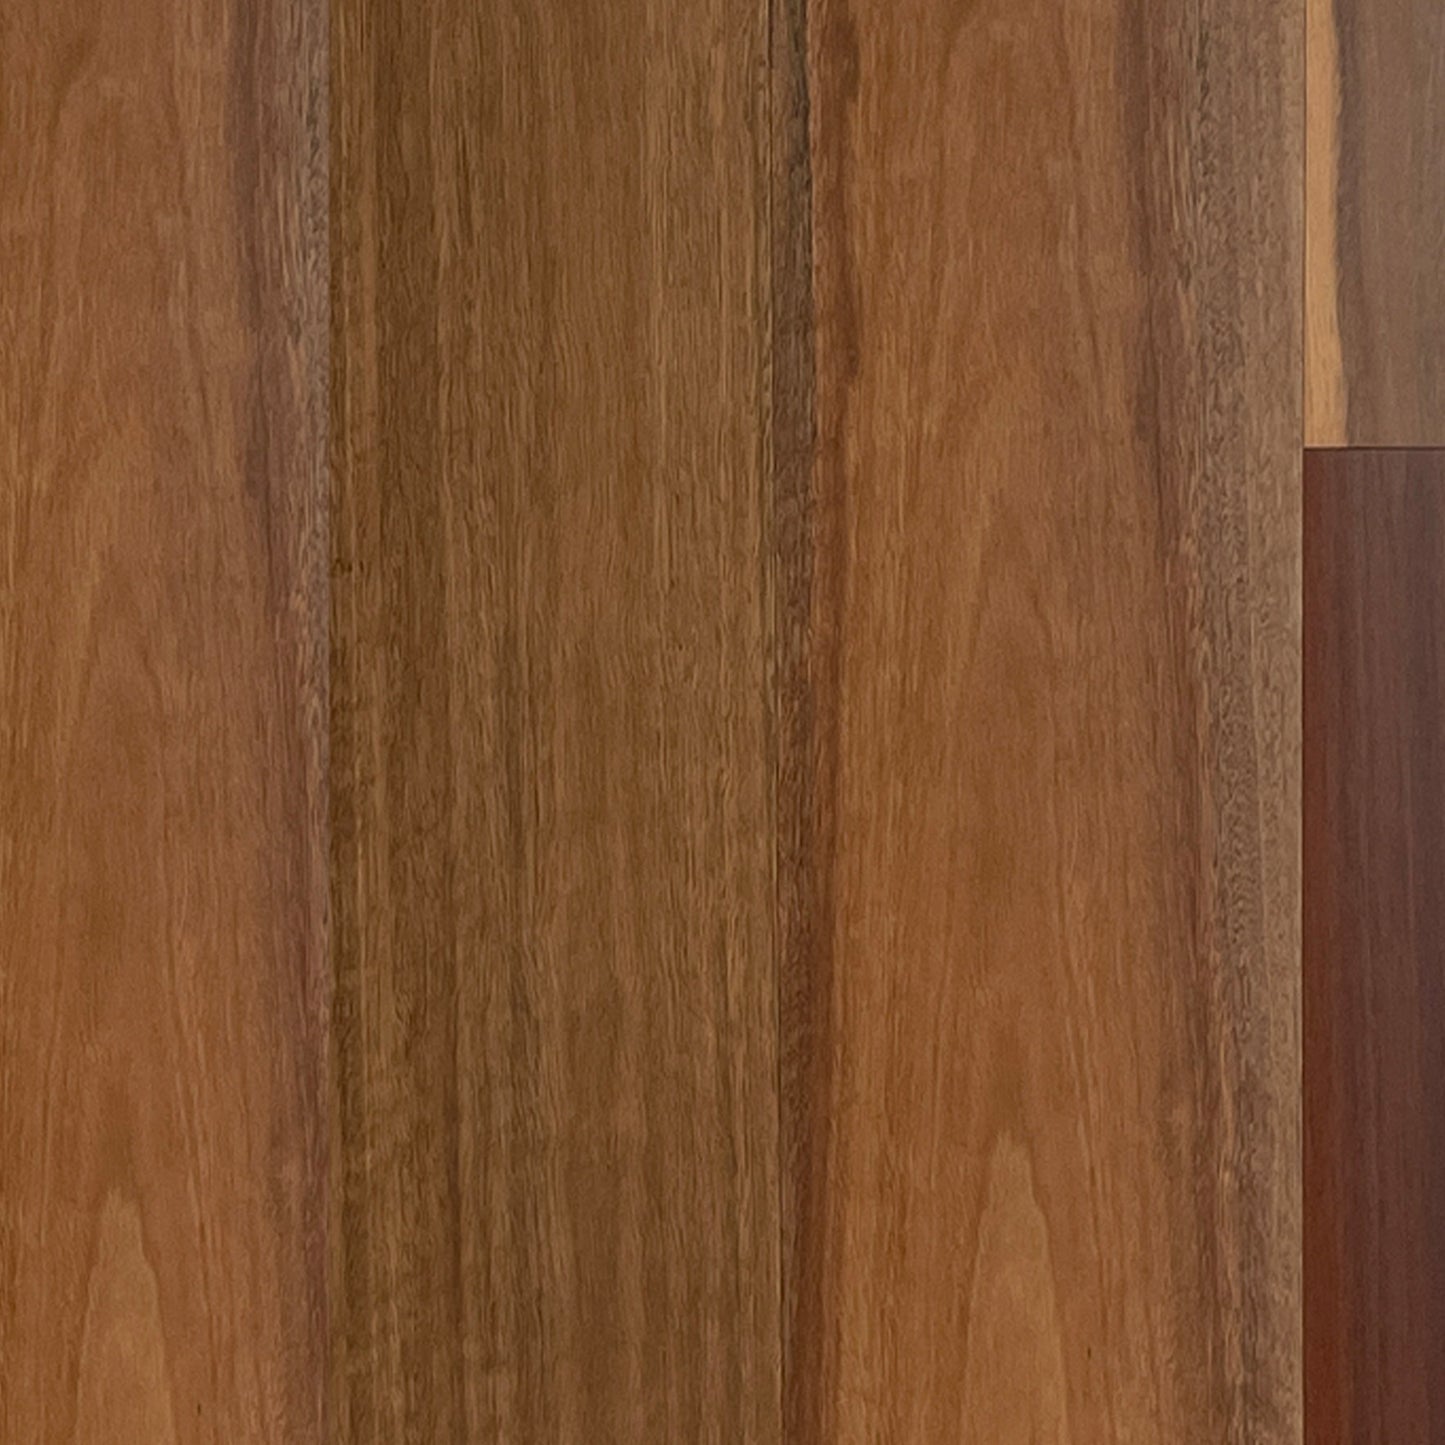 Australian Spotted Gum Engineered Timber Flooring by KLD Home